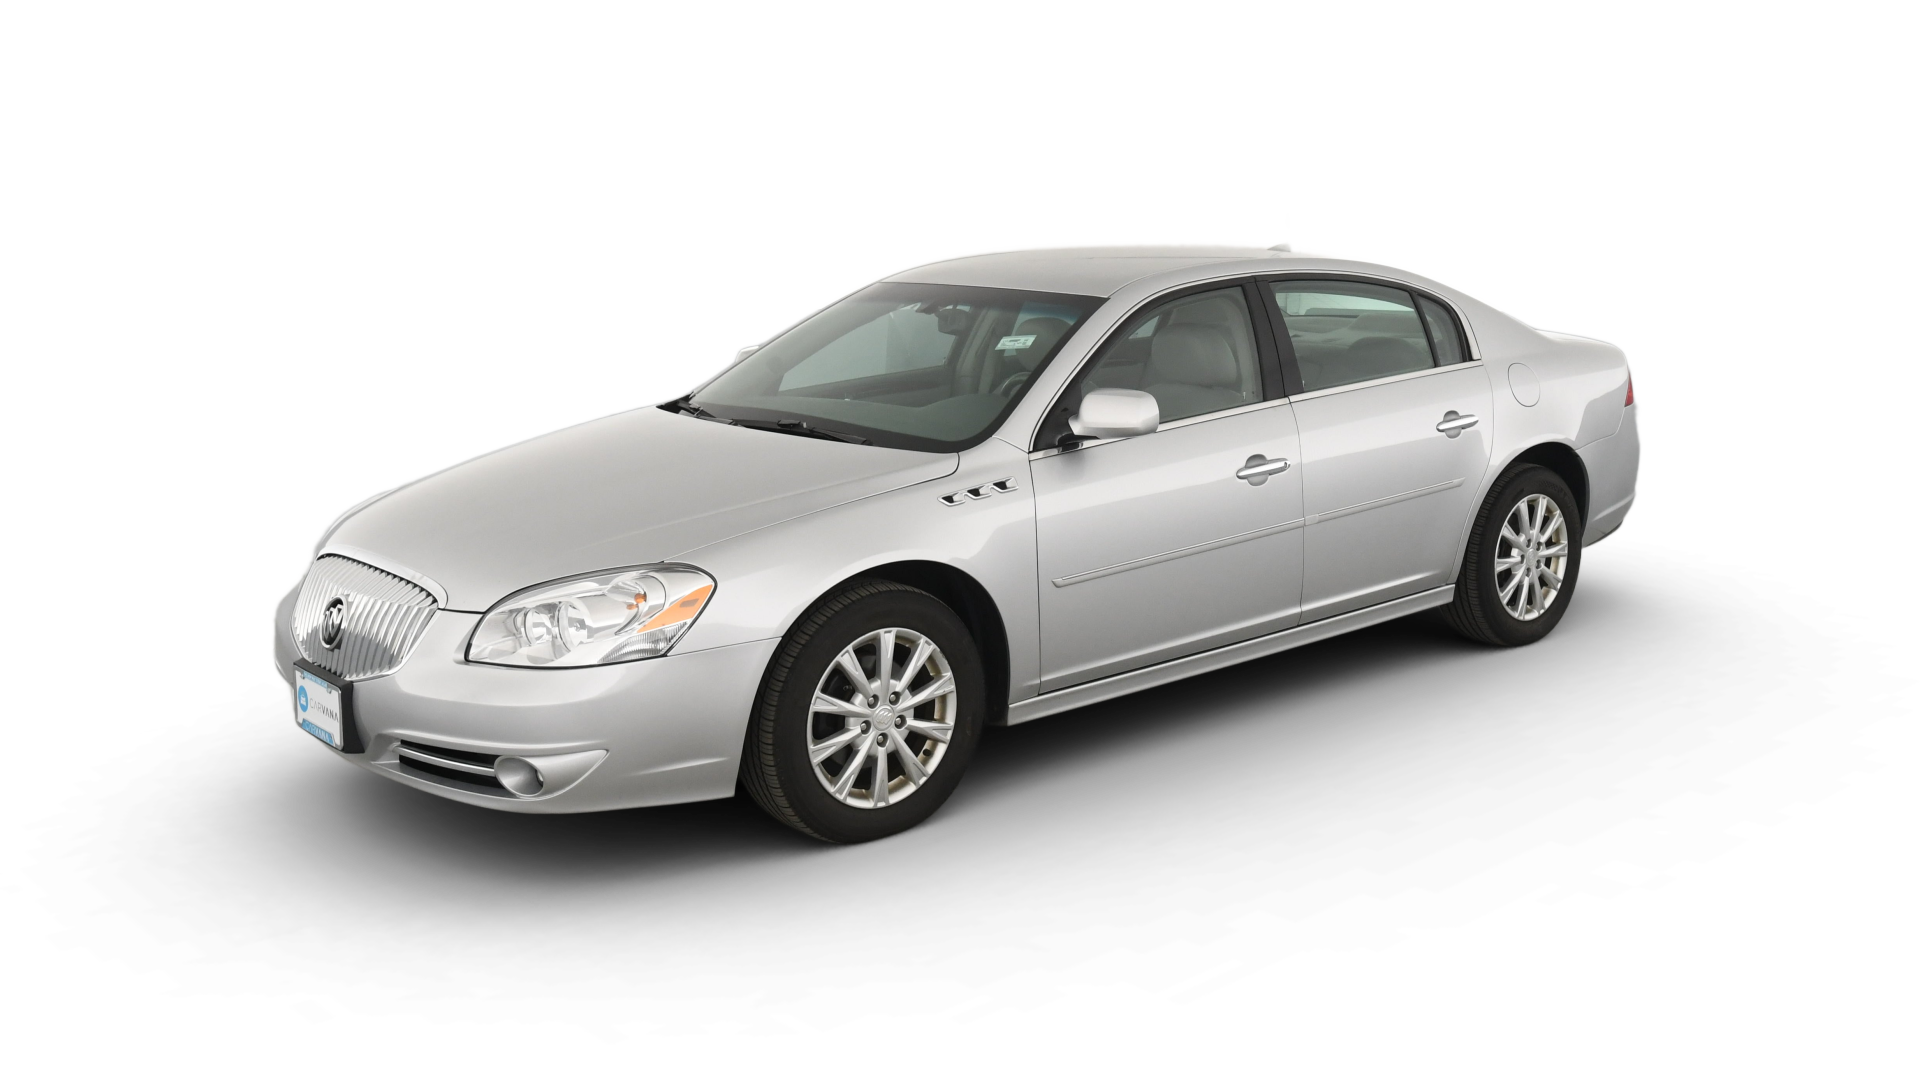 Used Buick Lucerne For Sale Online | Carvana